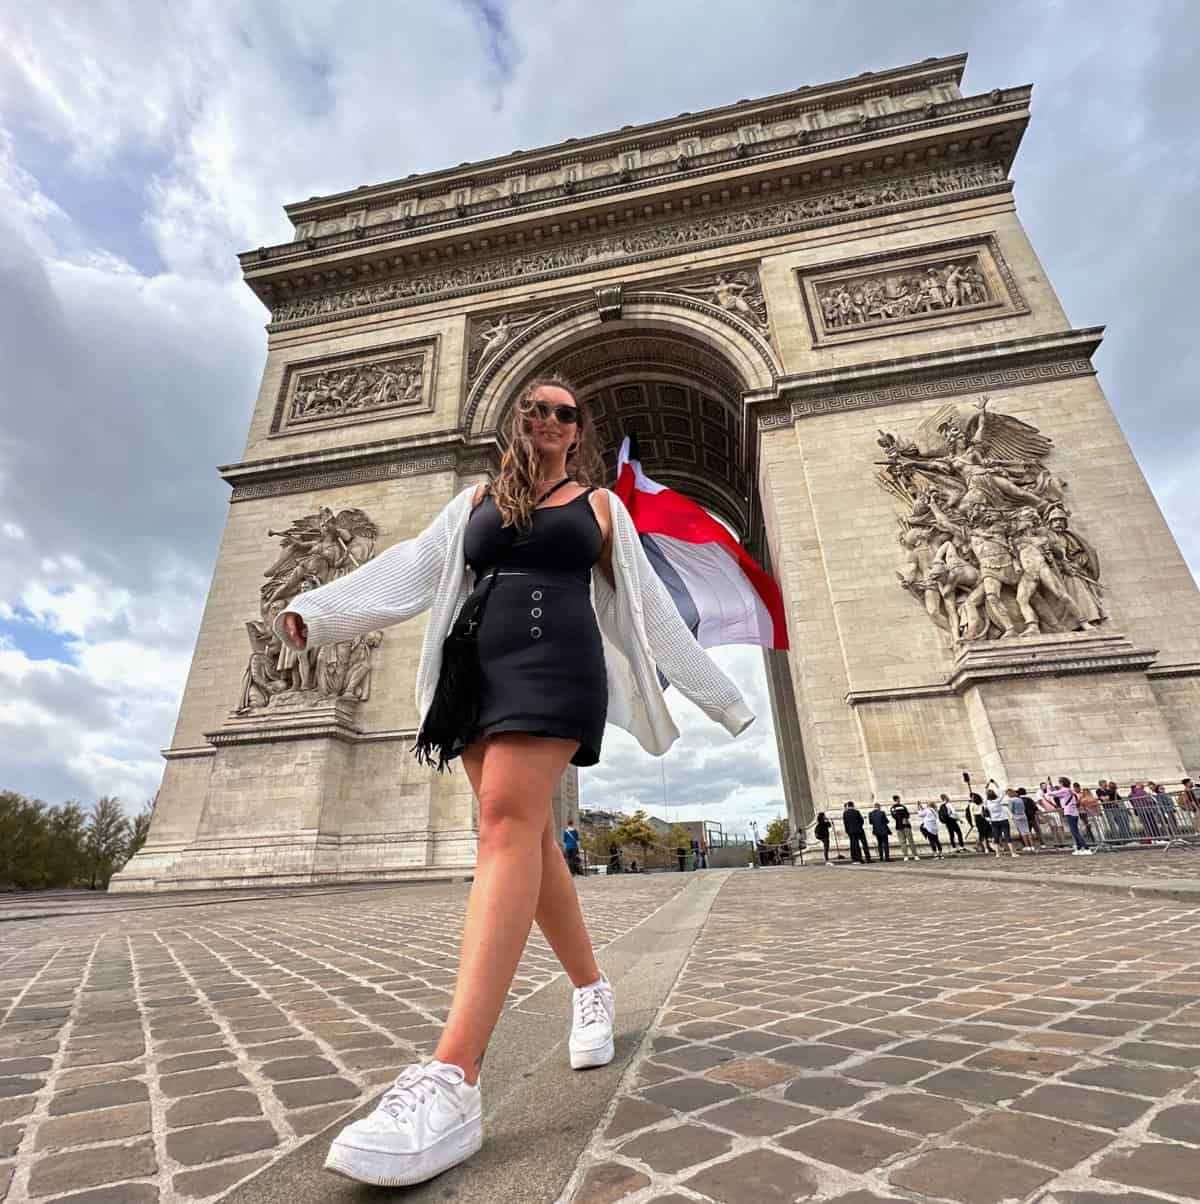 Jacqui walking towards the camera at a low angle in front of the Arc De Triomphe in Paris, France.